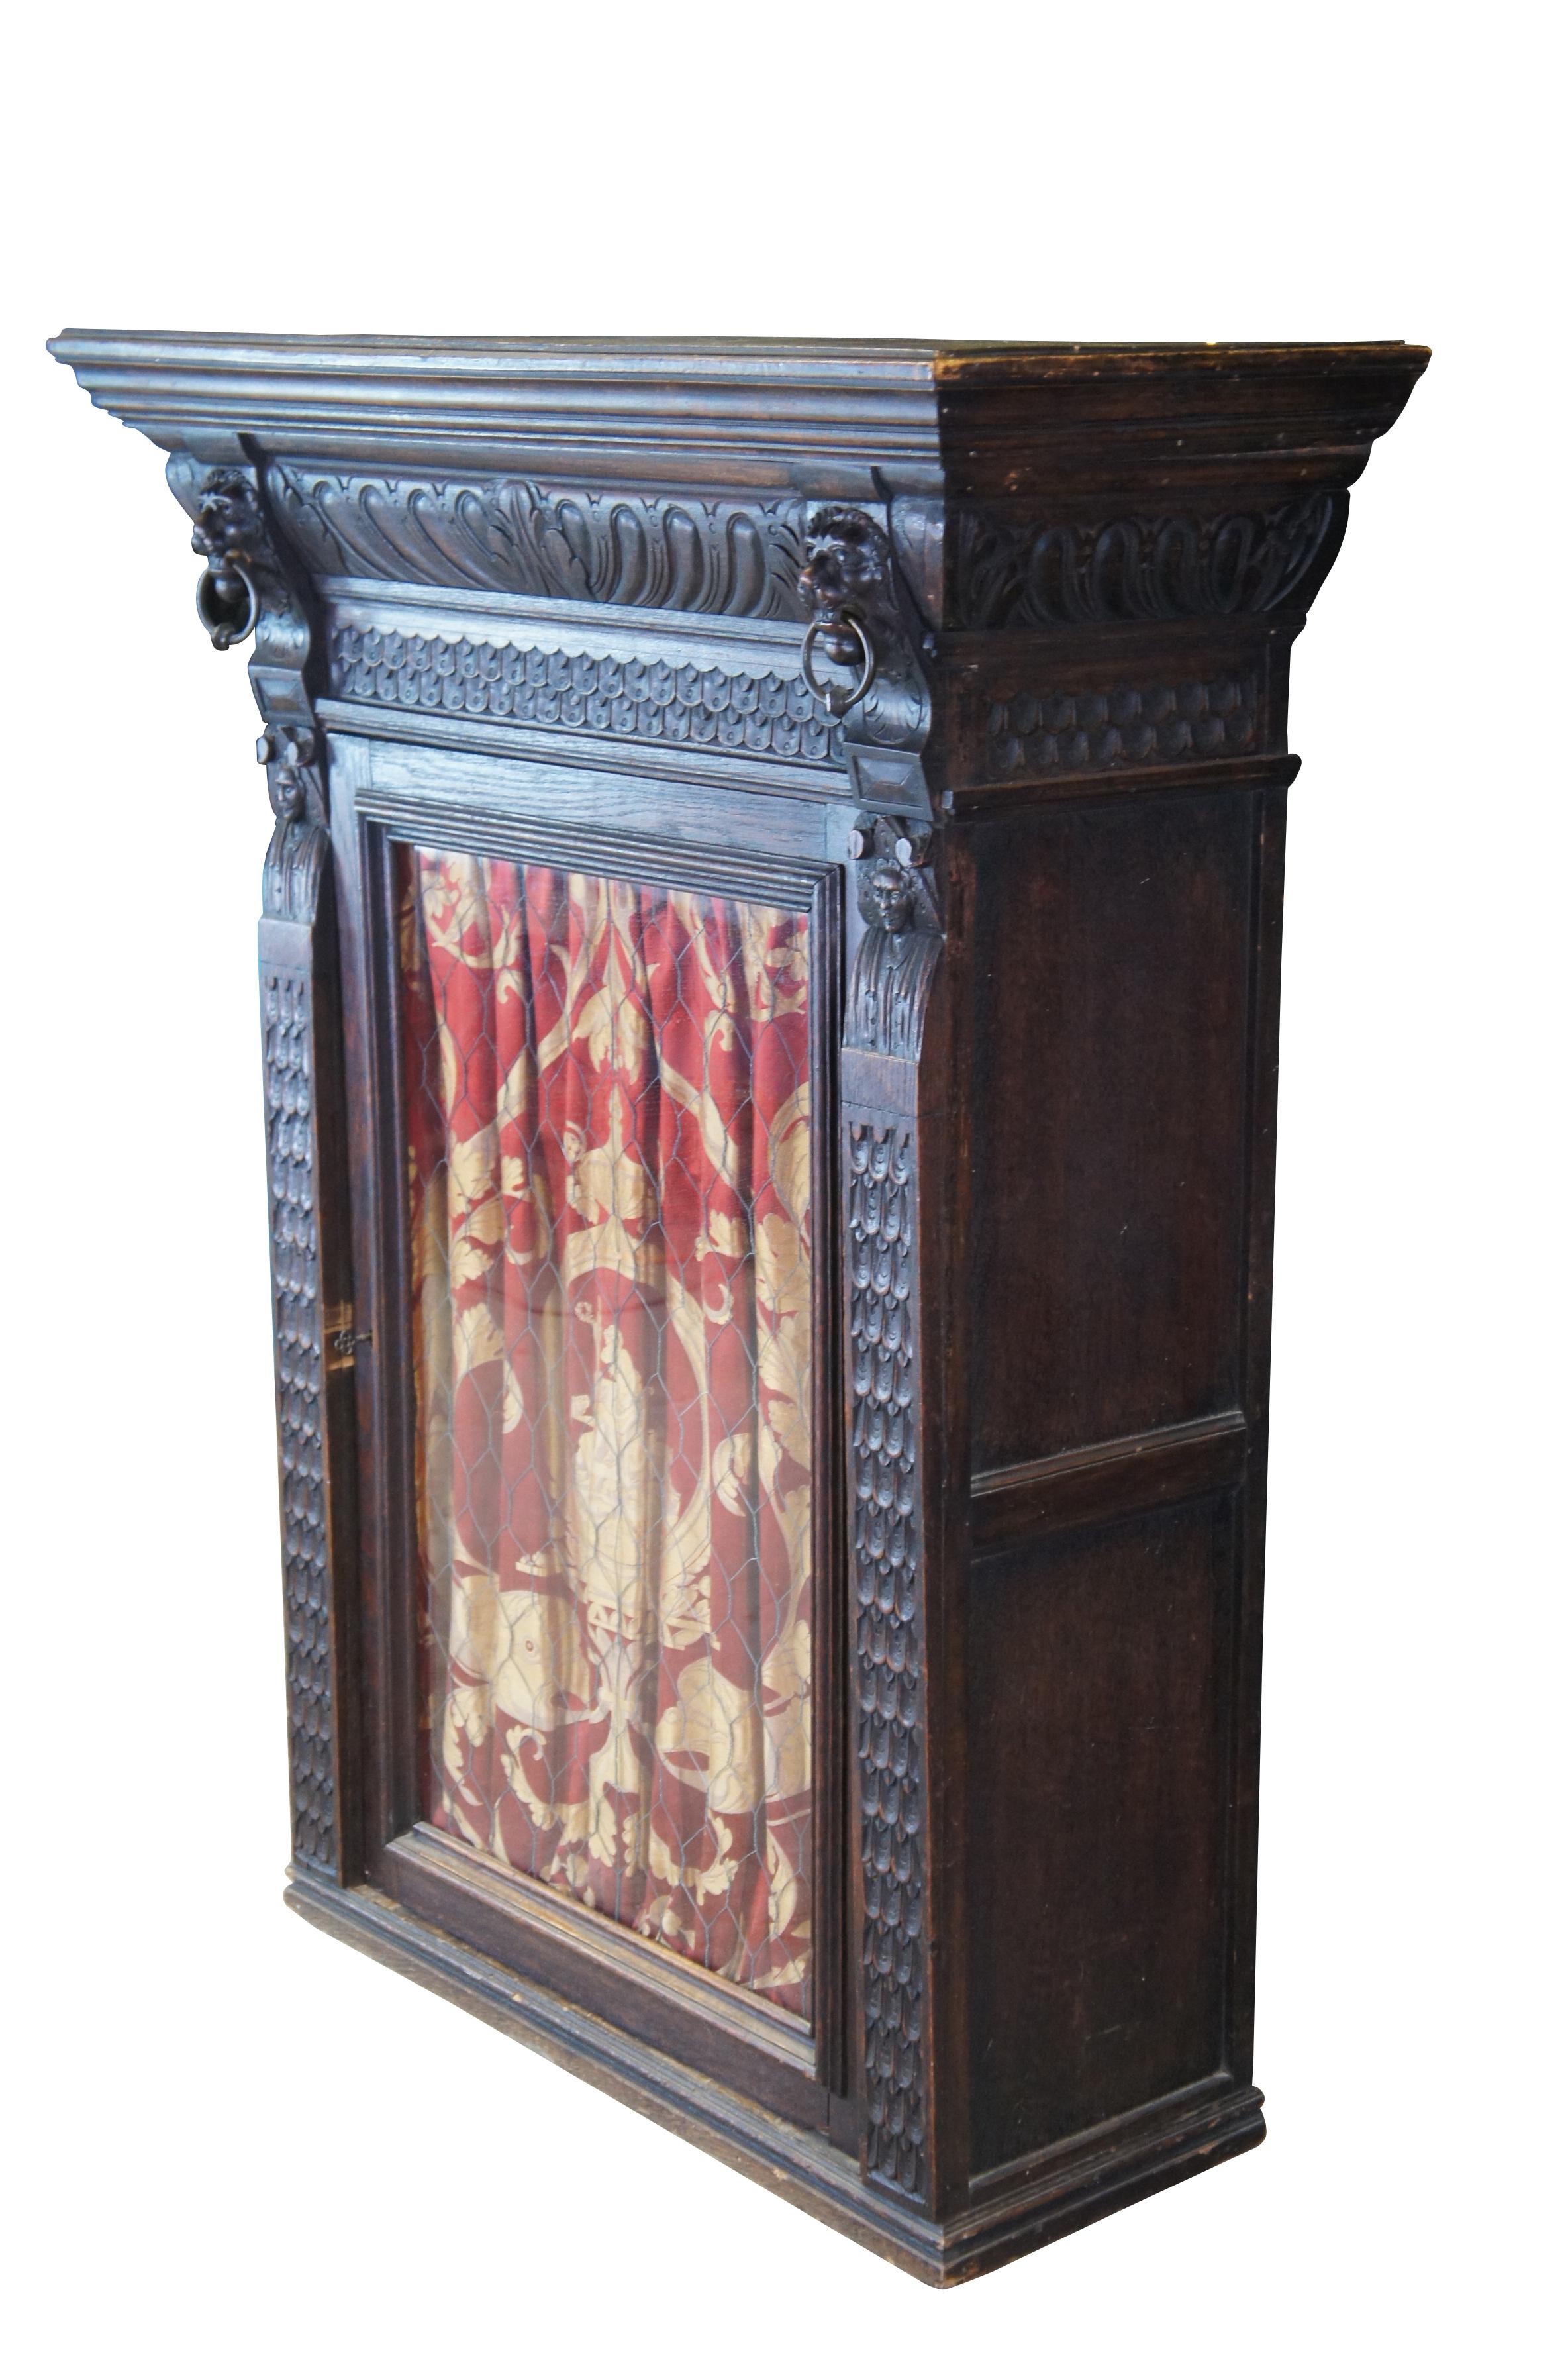 Antique 19th C. French Renaissance Revival Oak Hanging Bookcase Curio Cupboard In Good Condition For Sale In Dayton, OH